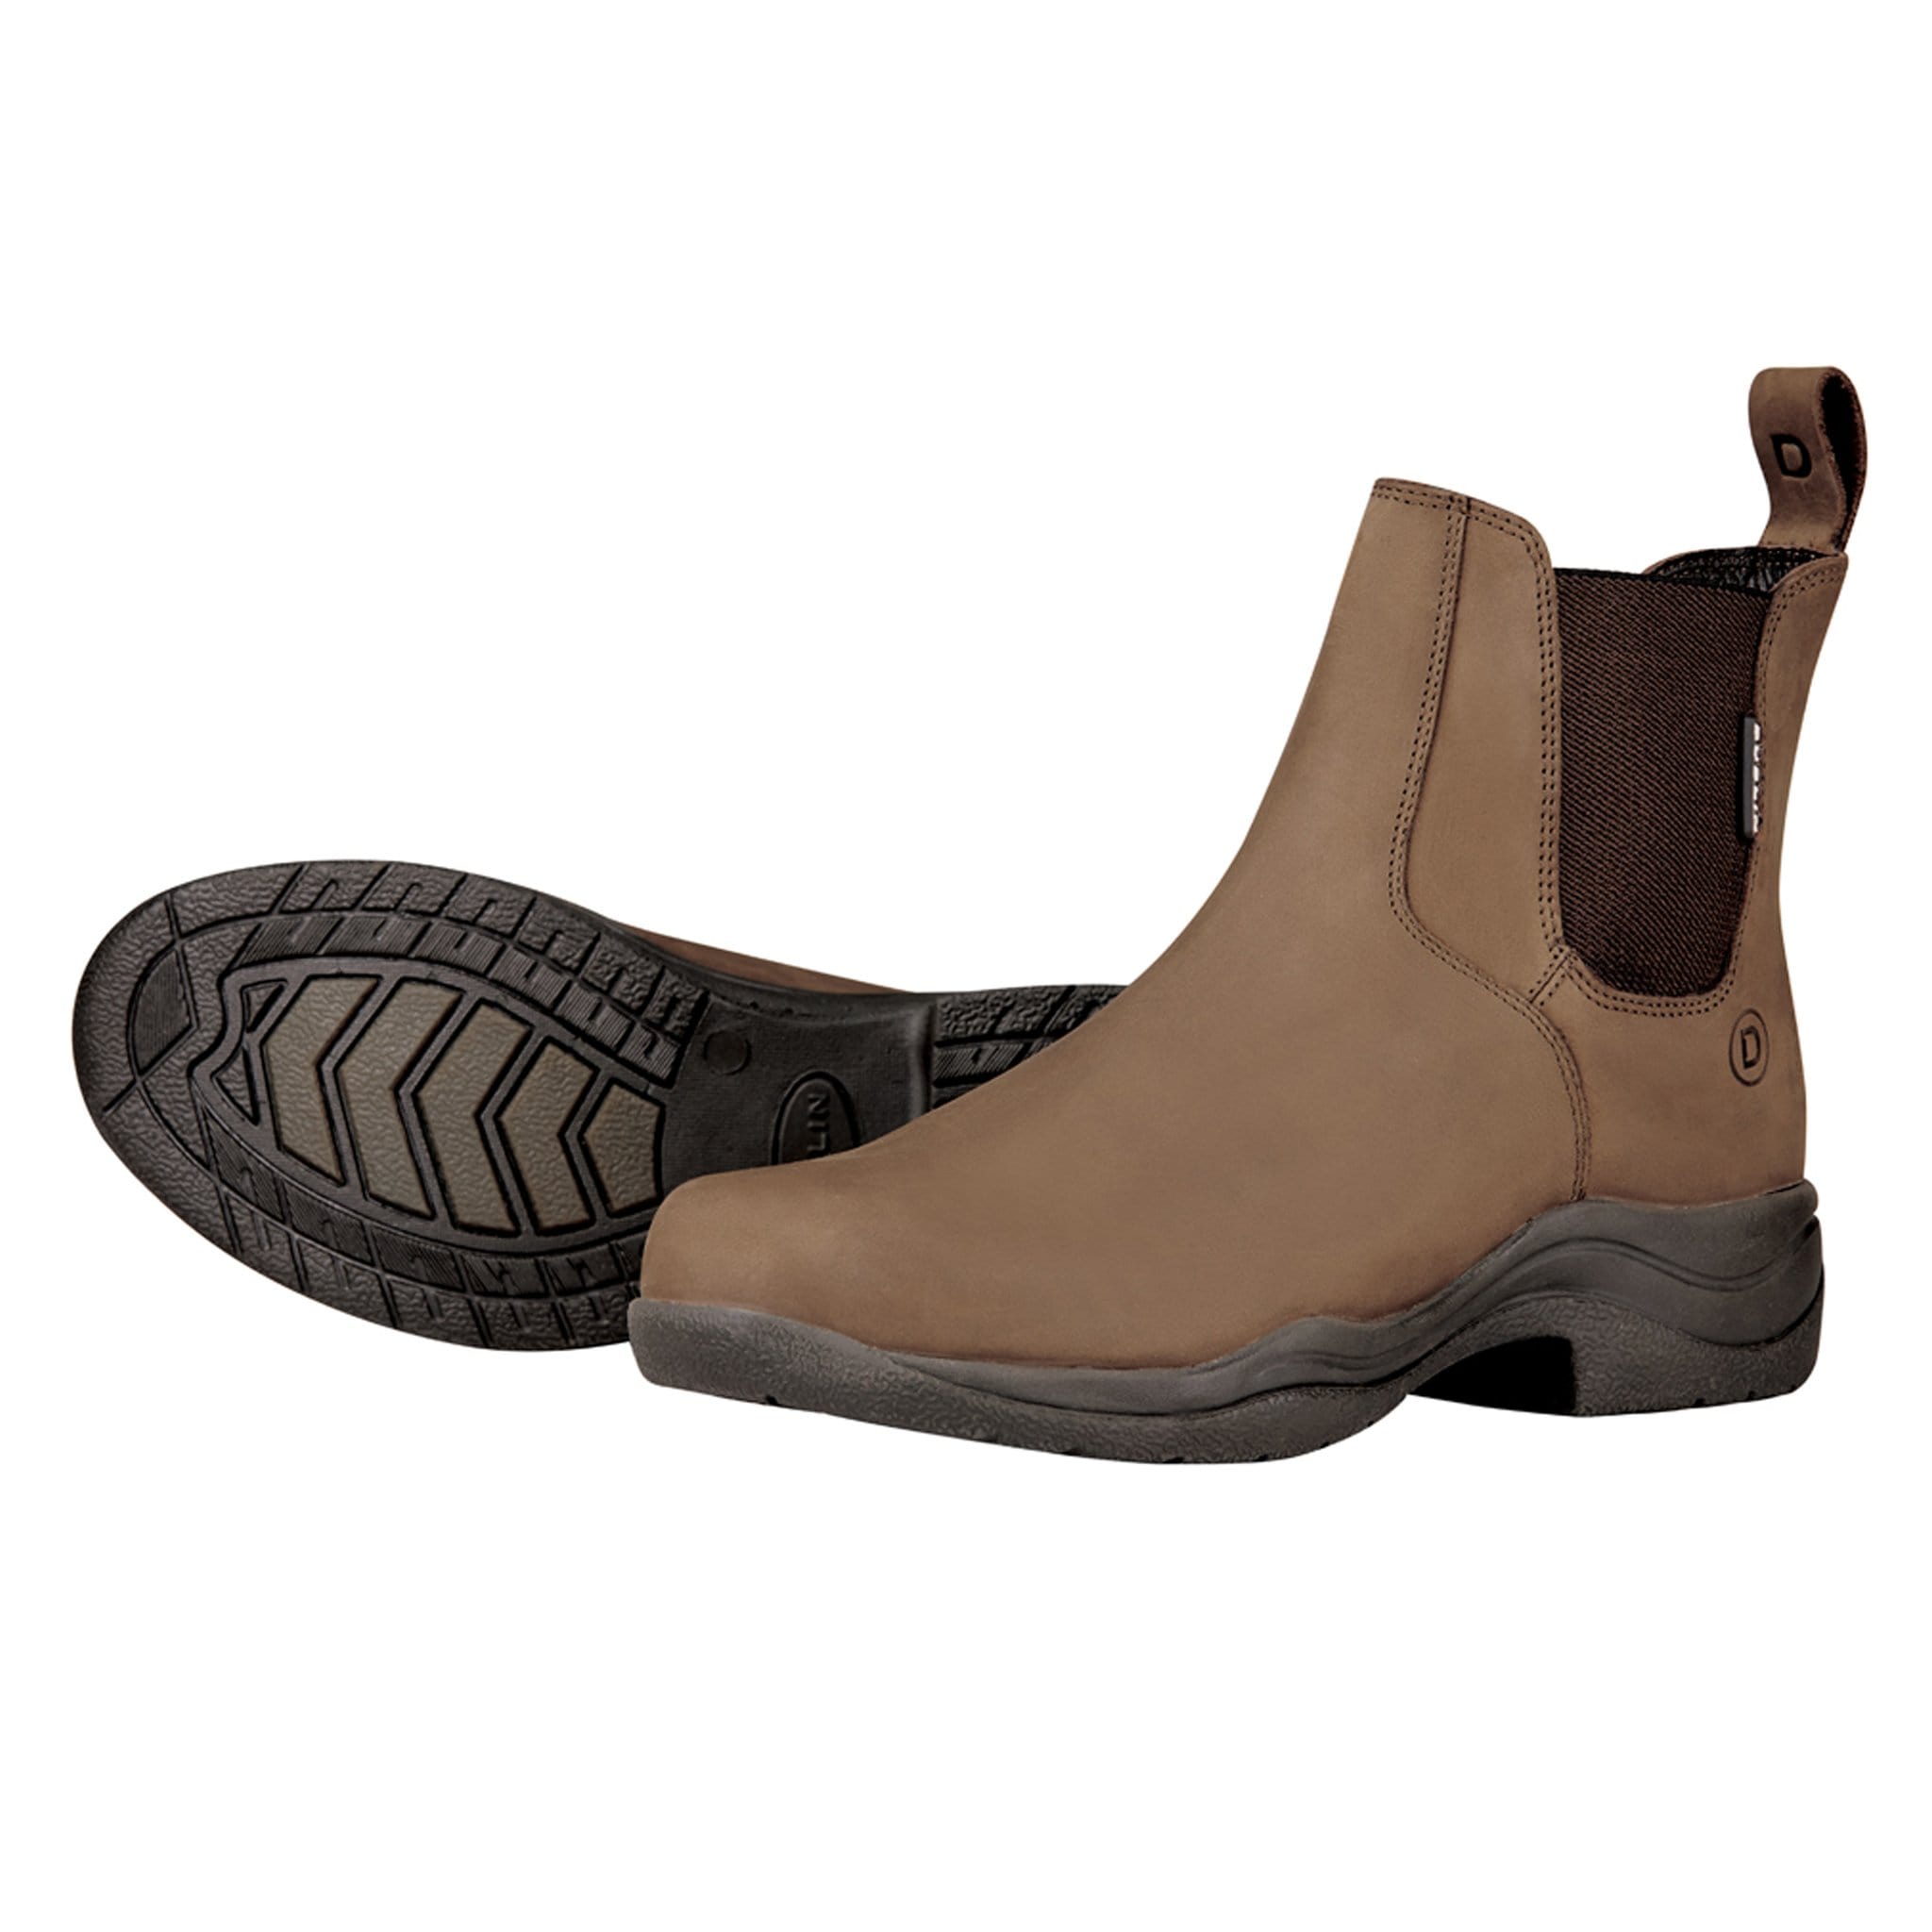 Dublin Venturer RS III Boots 1002153020 Brown Pair With Tread